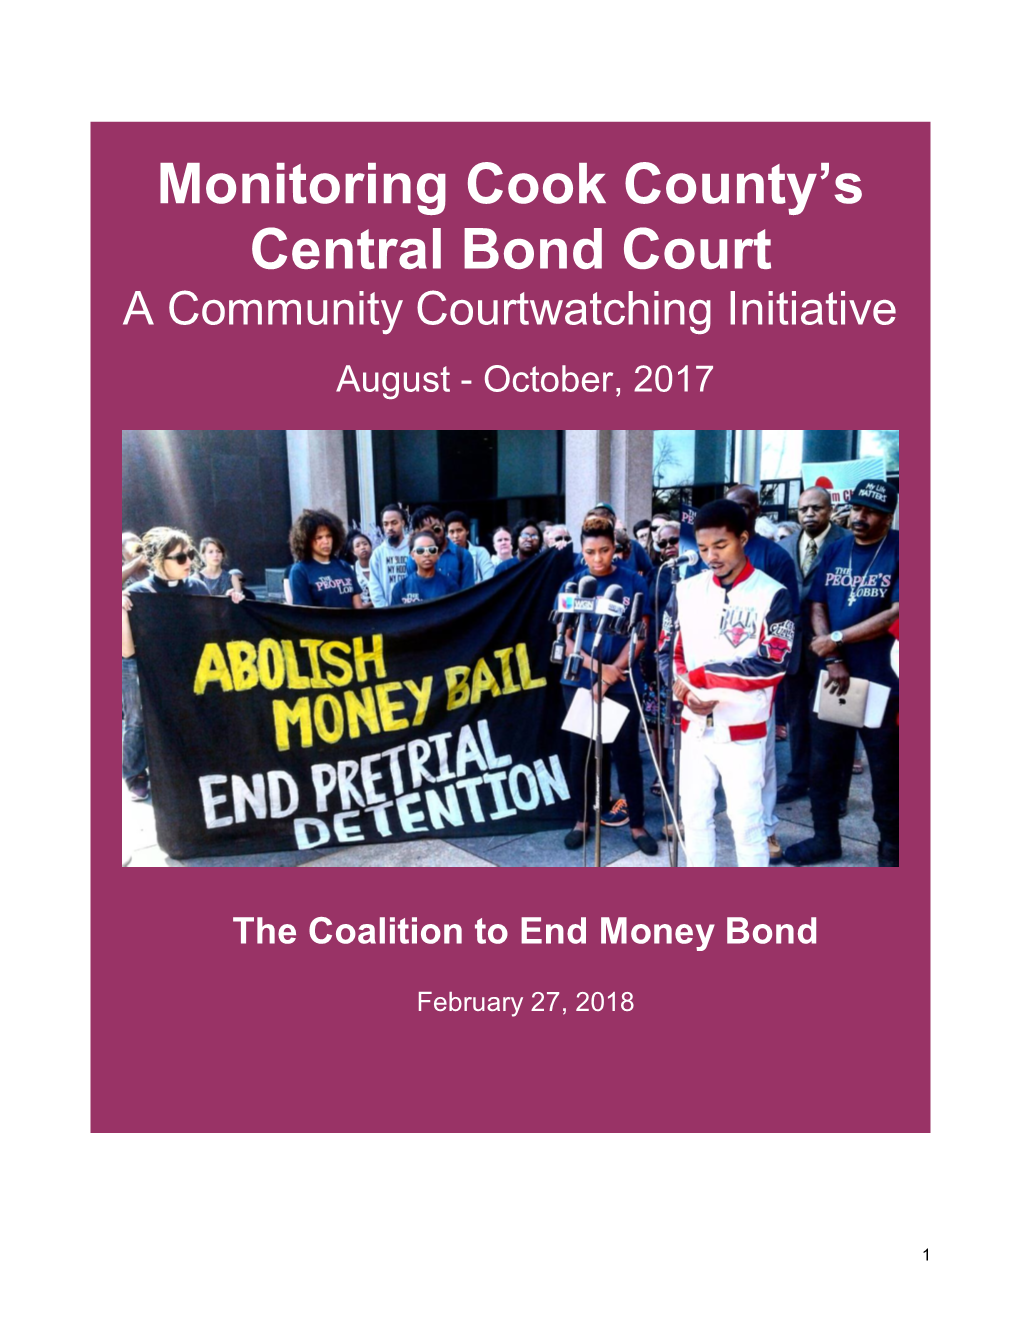 Monitoring Cook County's Central Bond Court